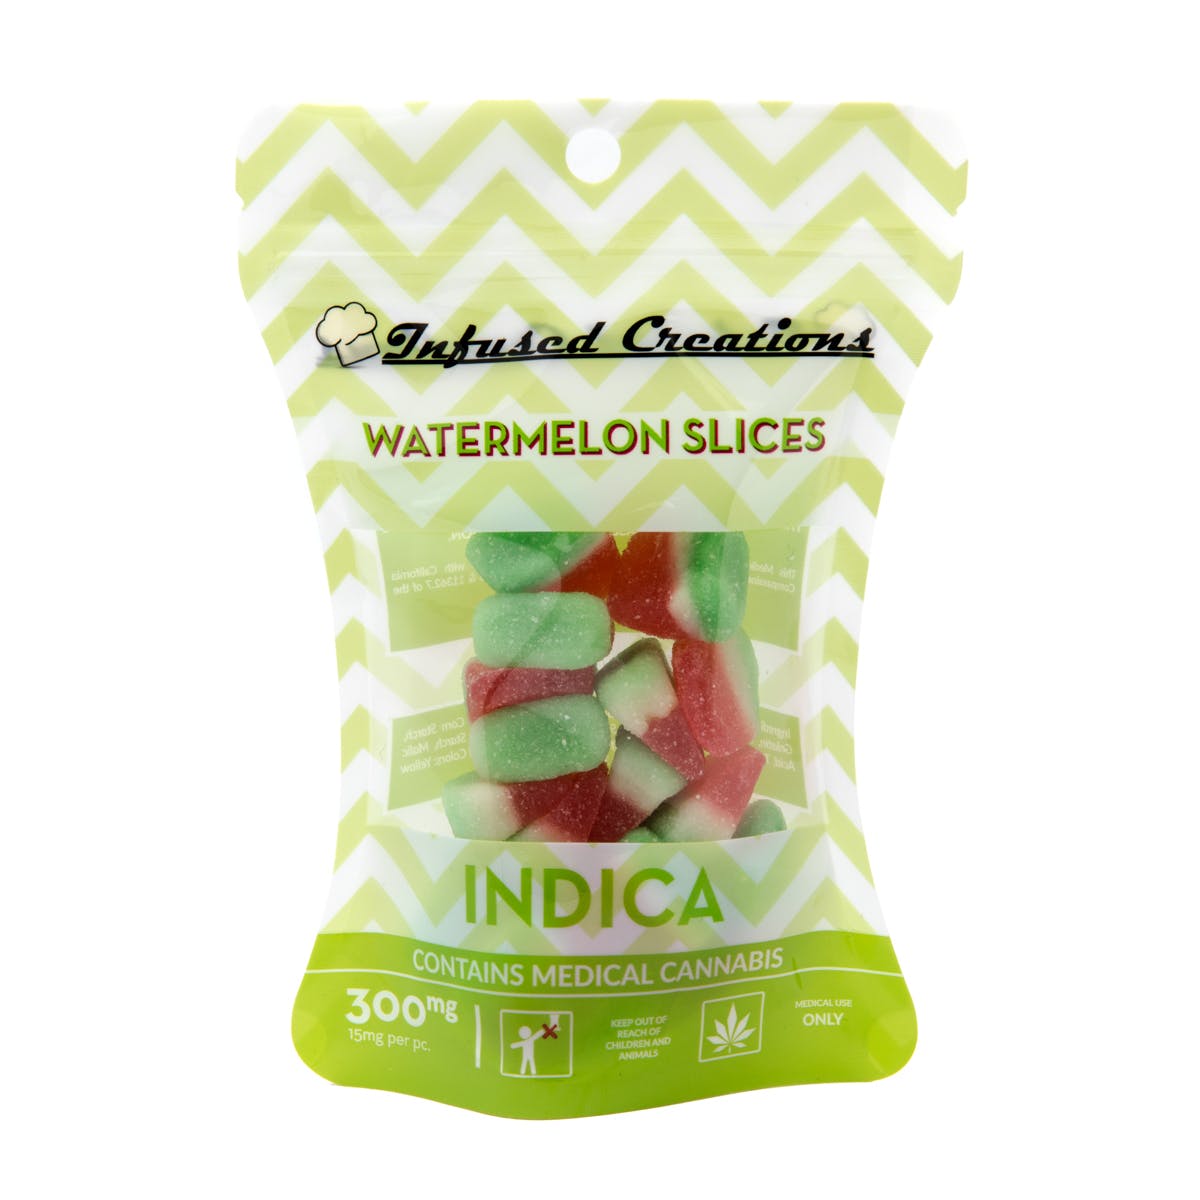 Watermelon Slices Indica, 300mg